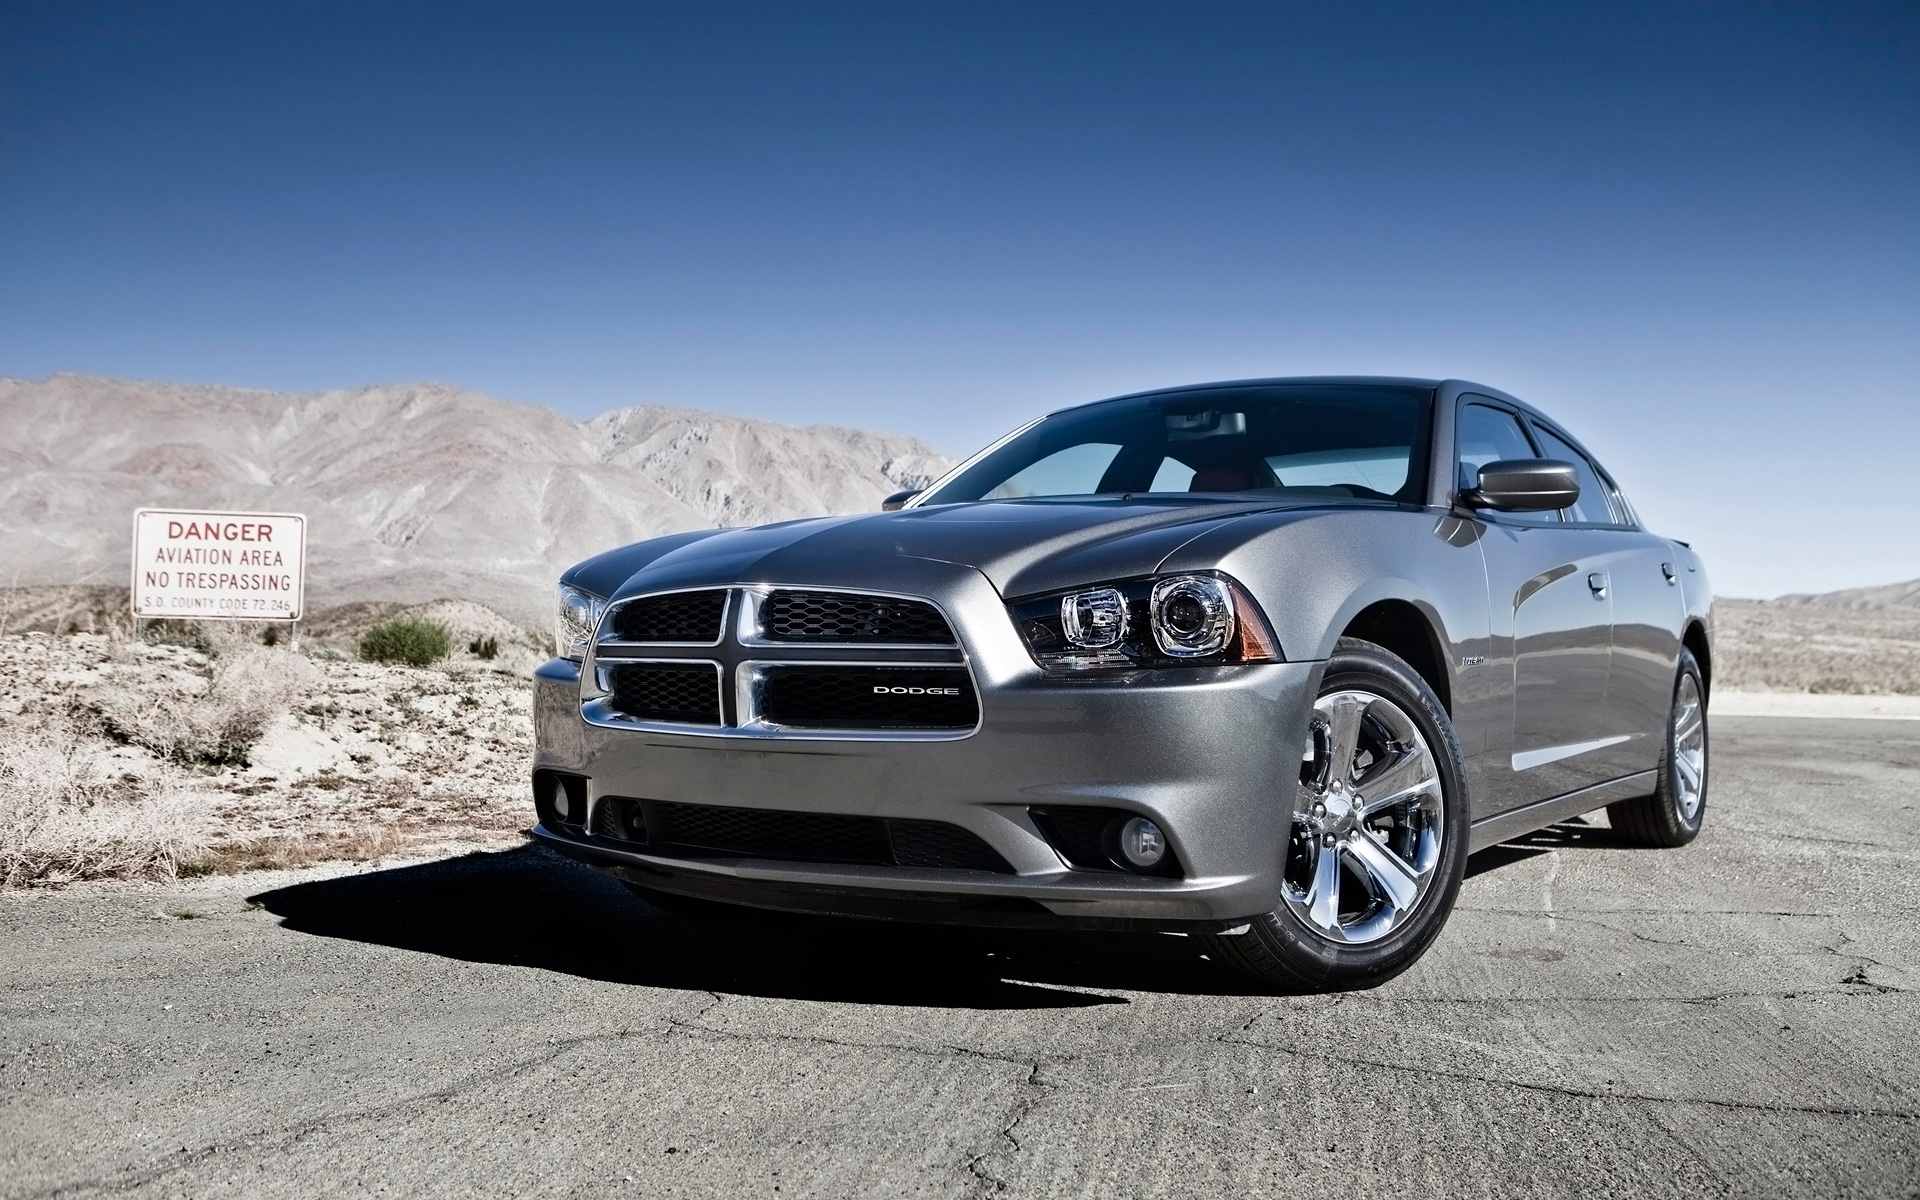 2012 Dodge Charger - HD Wallpaper 